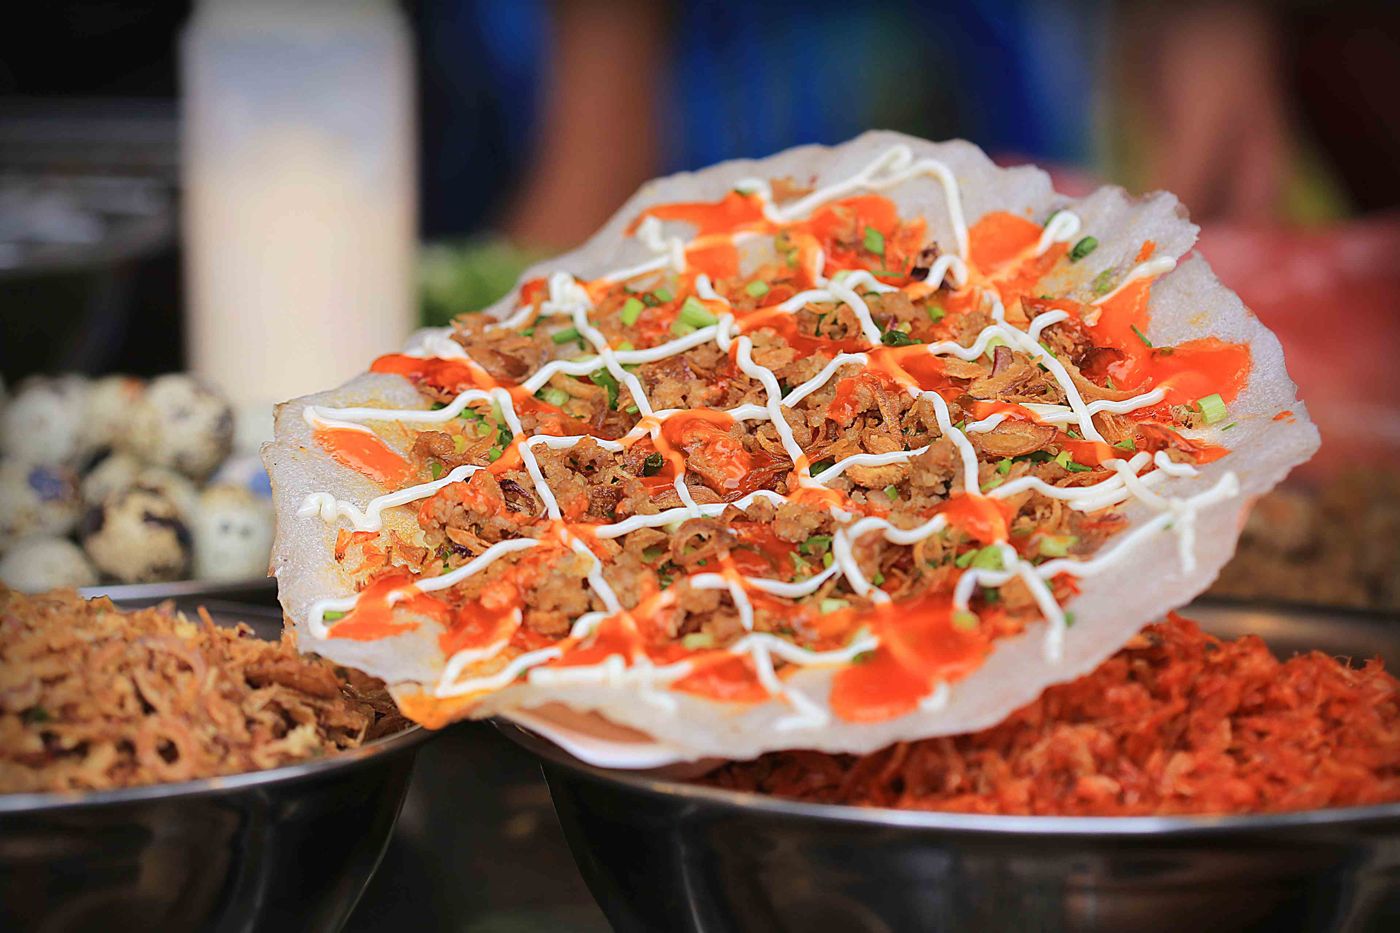 Do not miss the famous snacks and street food in Vietnam